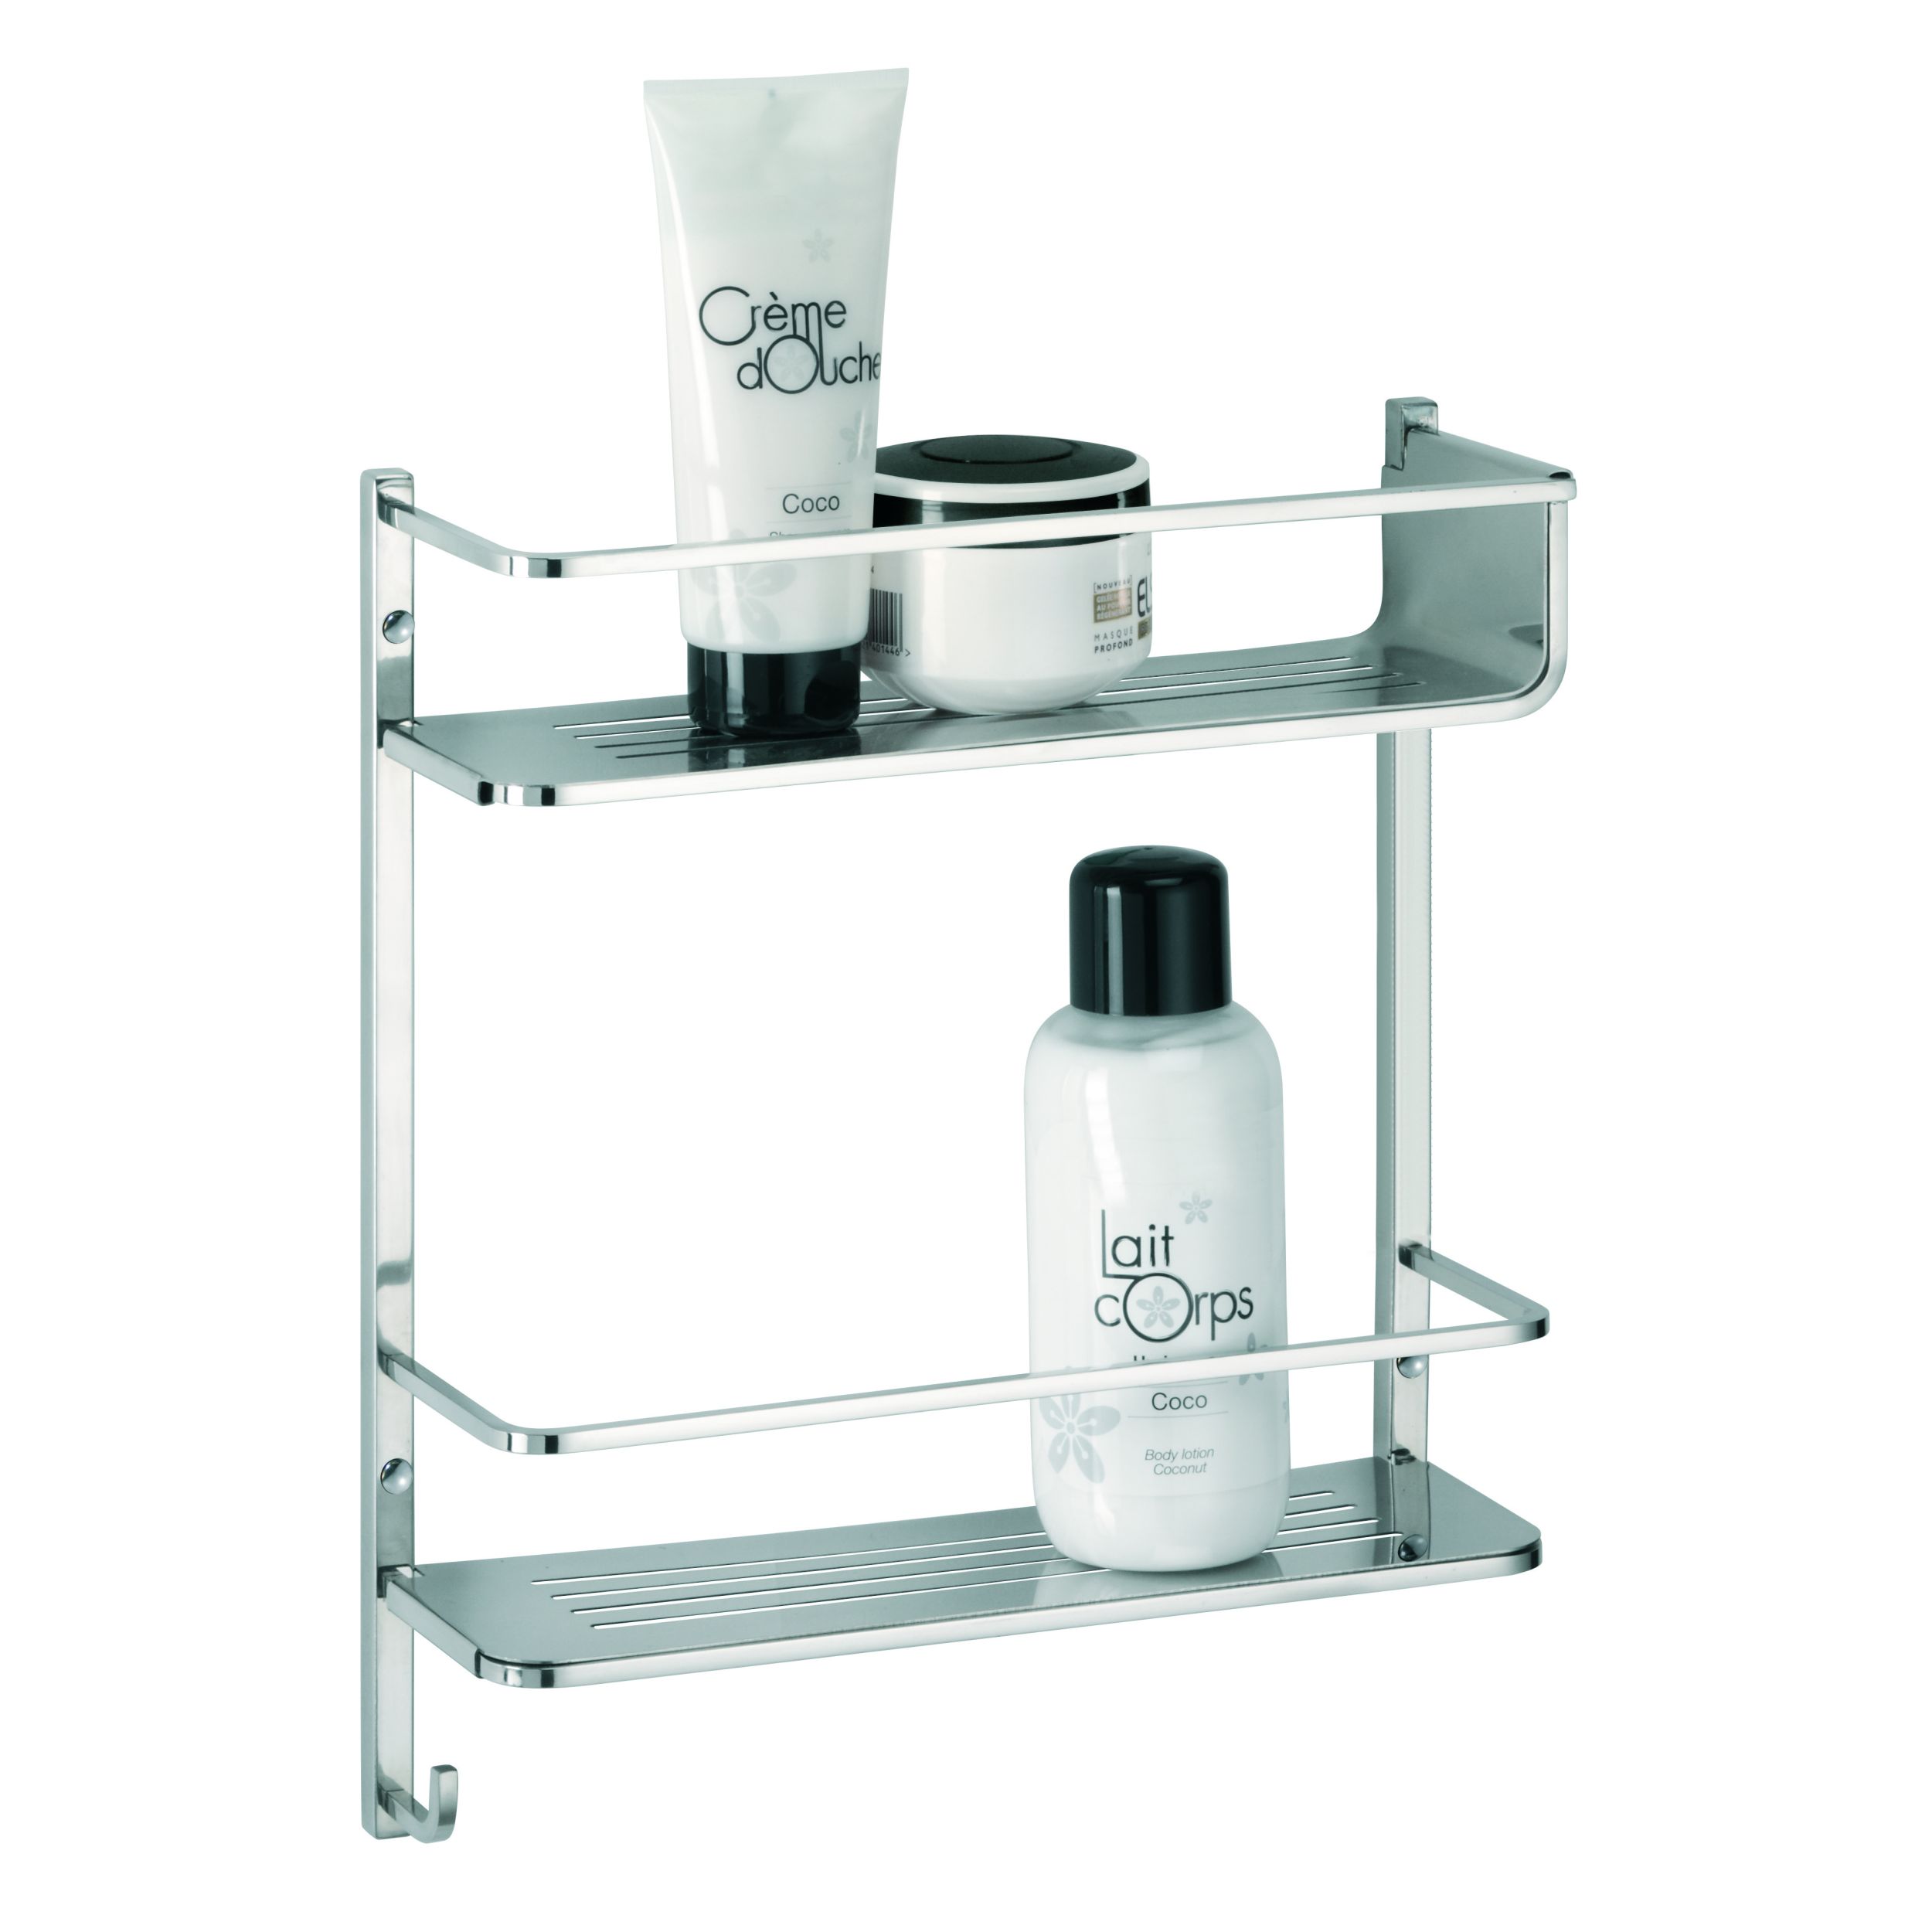  Shower caddy with 2 shelves